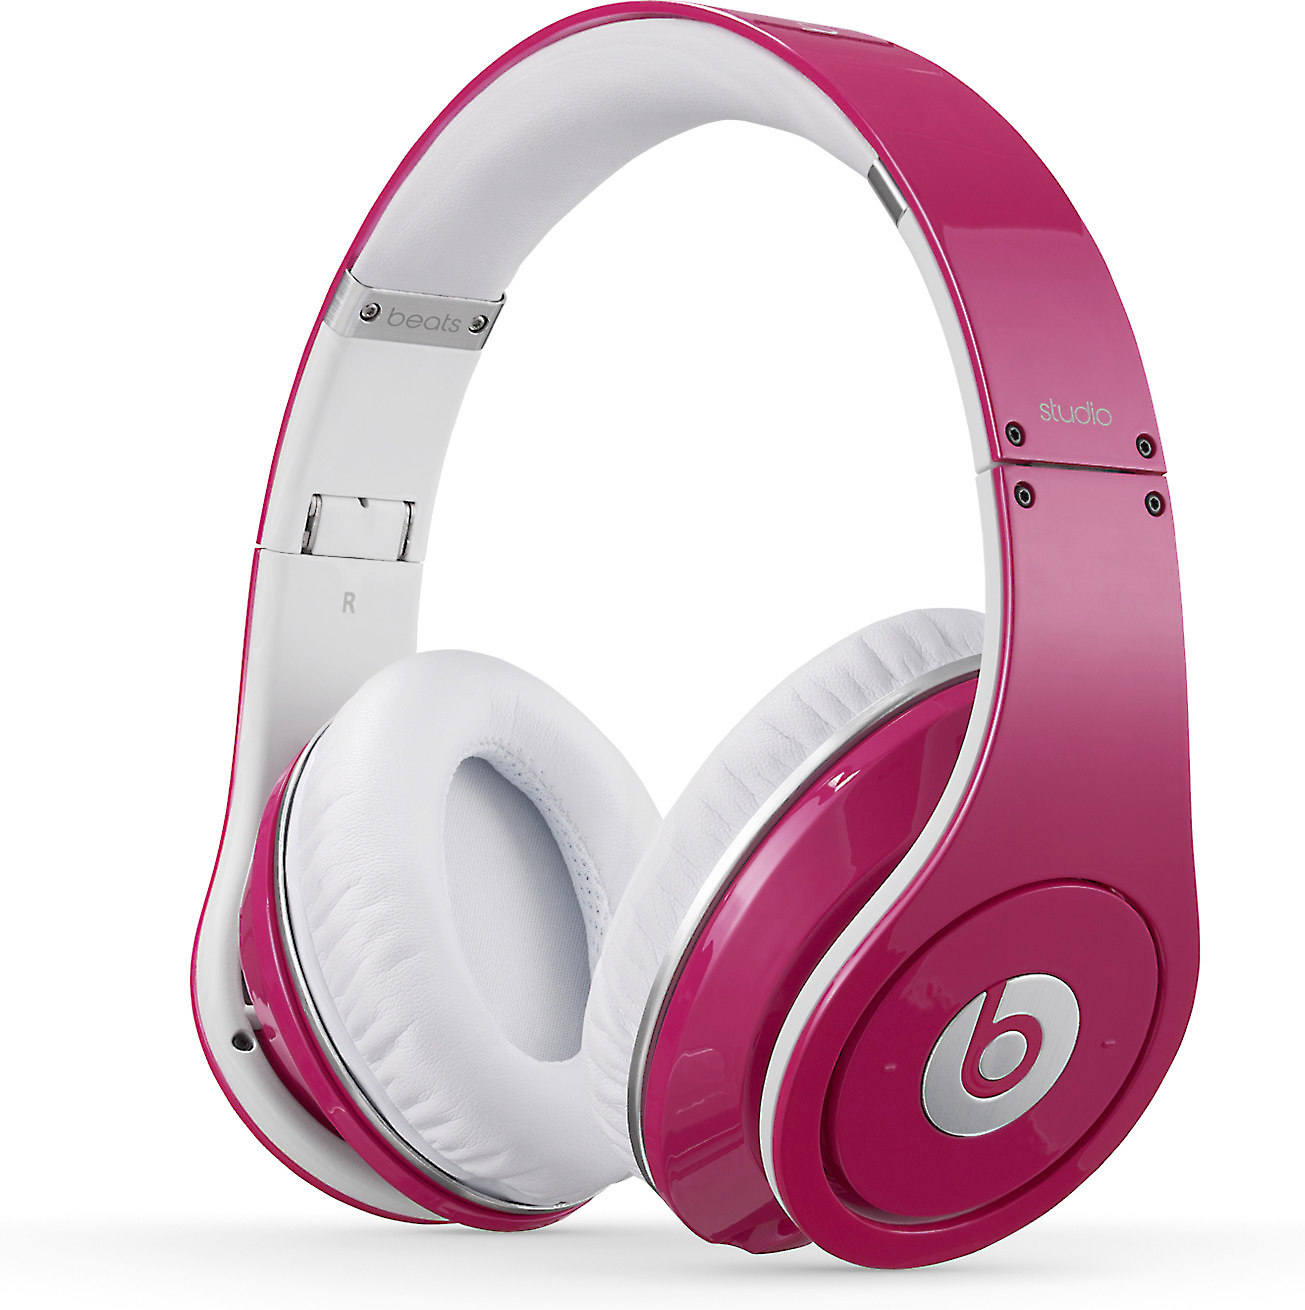 Beats by Dr. Dre™ Studio™ (Pink) Over 